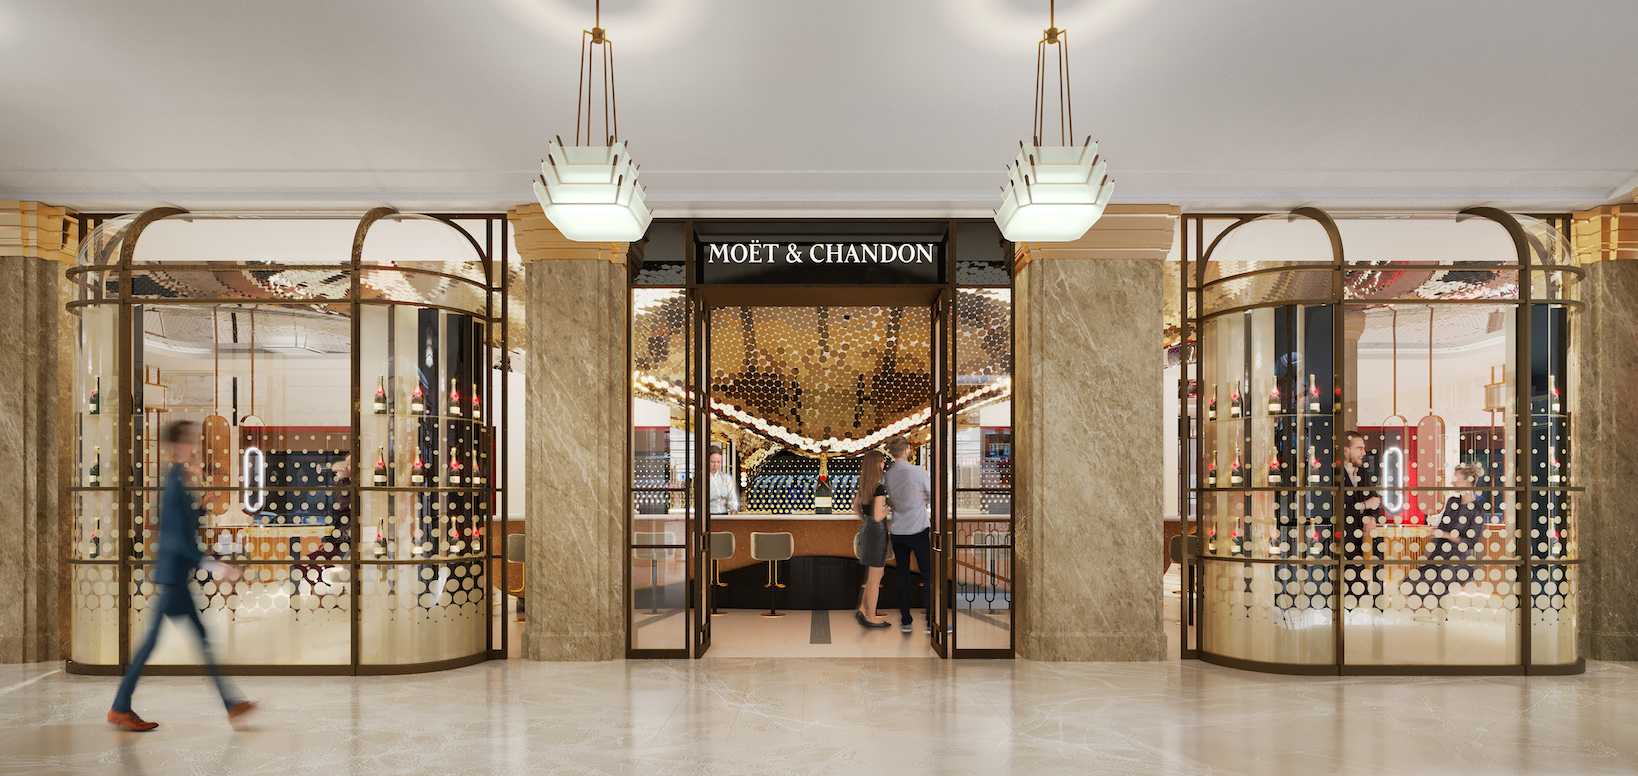 Moët Chandon Champagne Bar at Harrods to open on 28 June 2022